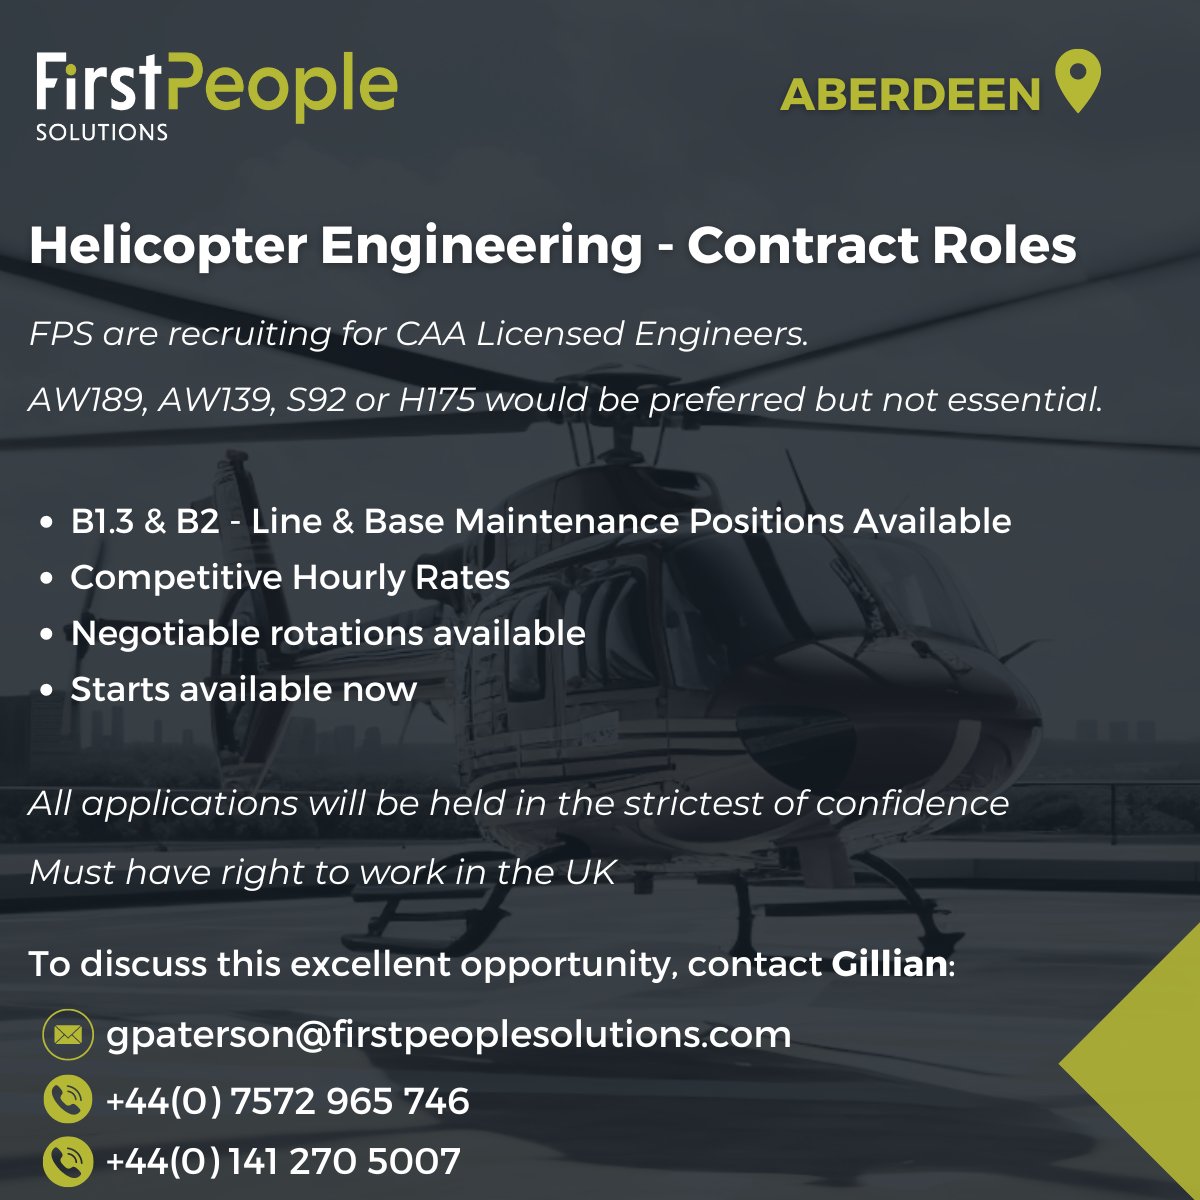 First People Solutions are in search of Helicopter Engineers to join our team based in Aberdeen🚁 If you’re interested and to apply, please contact Gillian Paterson: 📧: gpaterson@firstpeoplesolutions.com 📞: +44(0) 7572 965 746 📞: +44(0) 141 270 5007 #firstpeoplesolutions